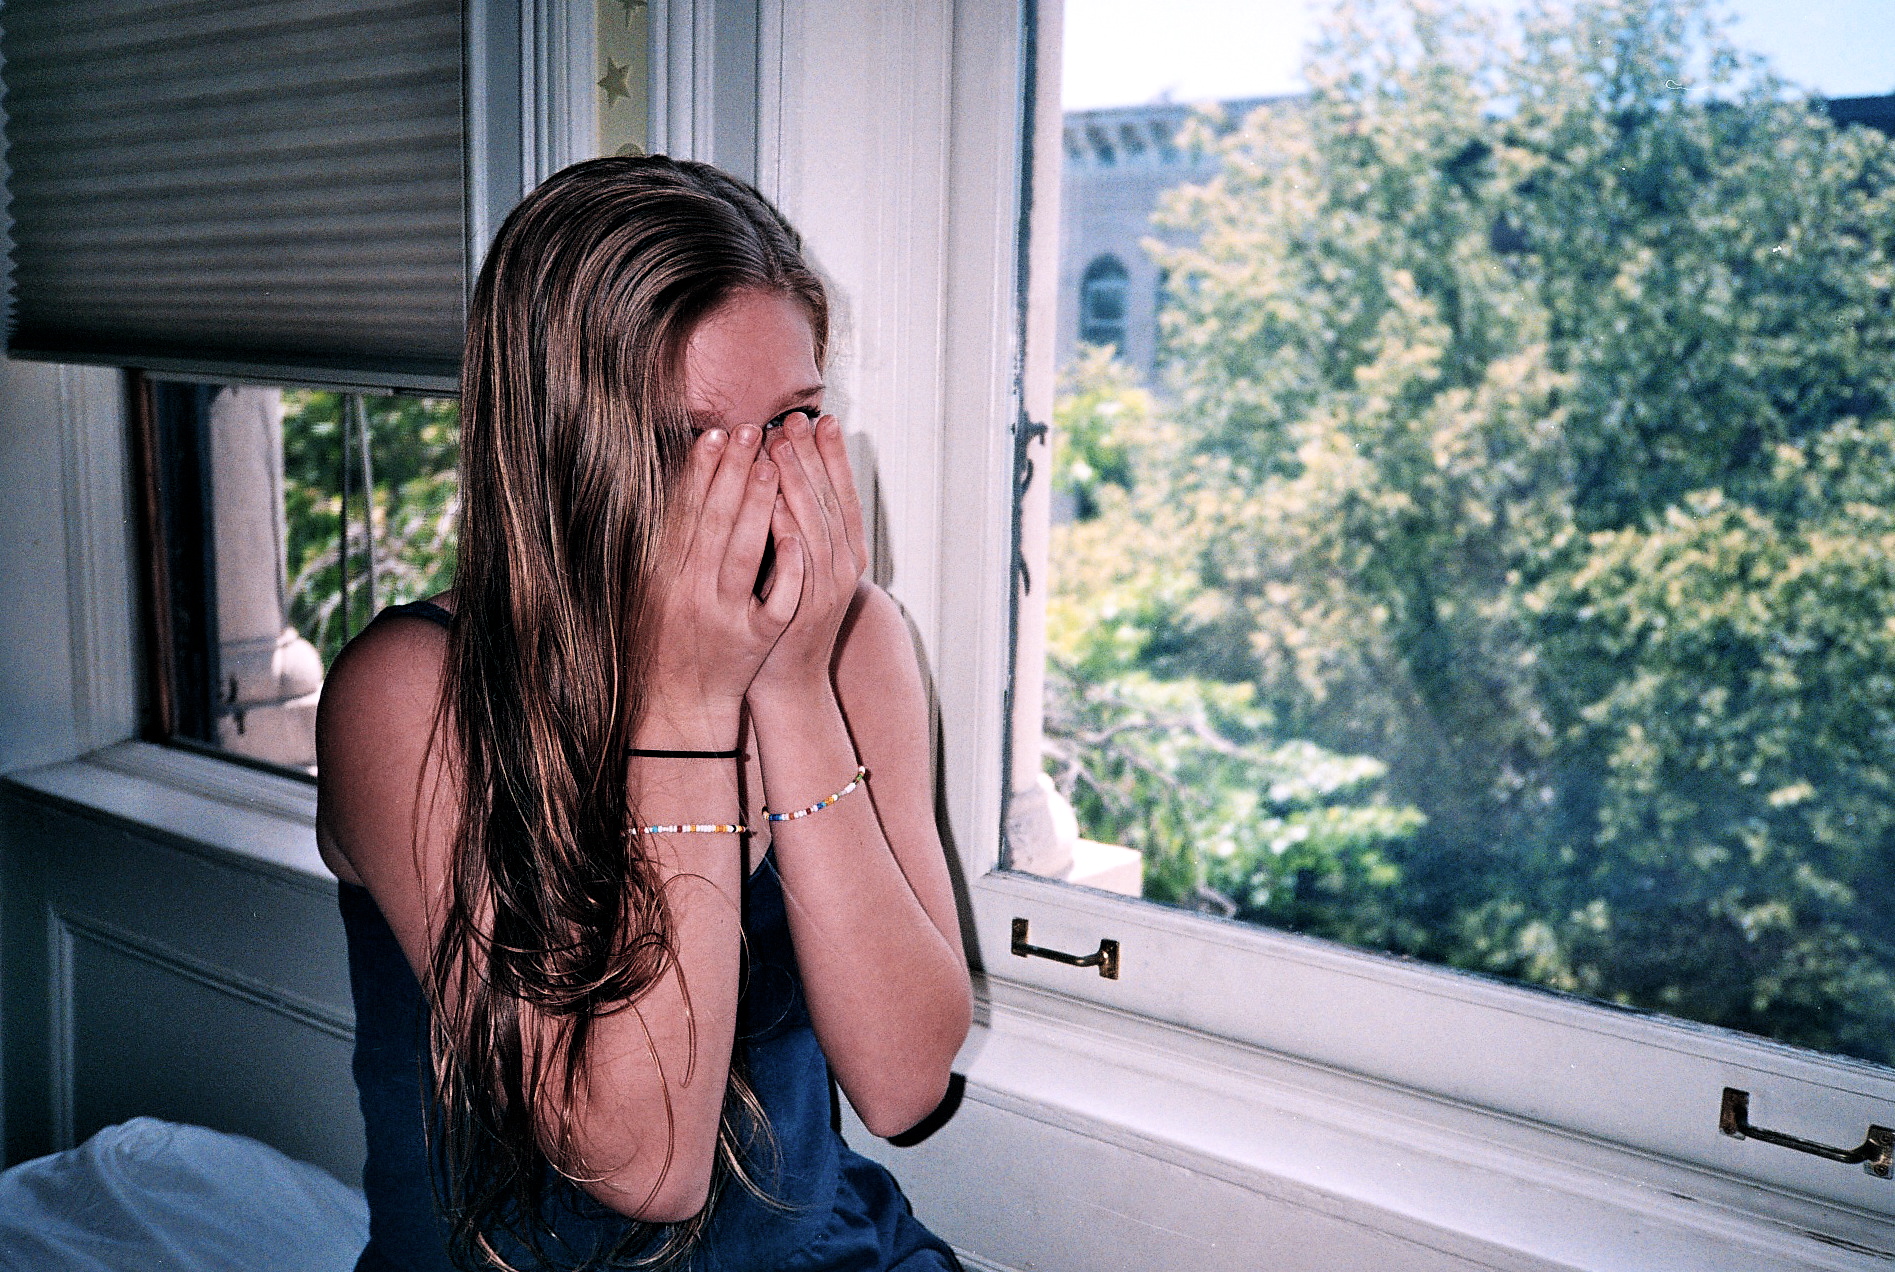 20 Things I Wish My Mom Already Knew Without Me Having To Tell Her